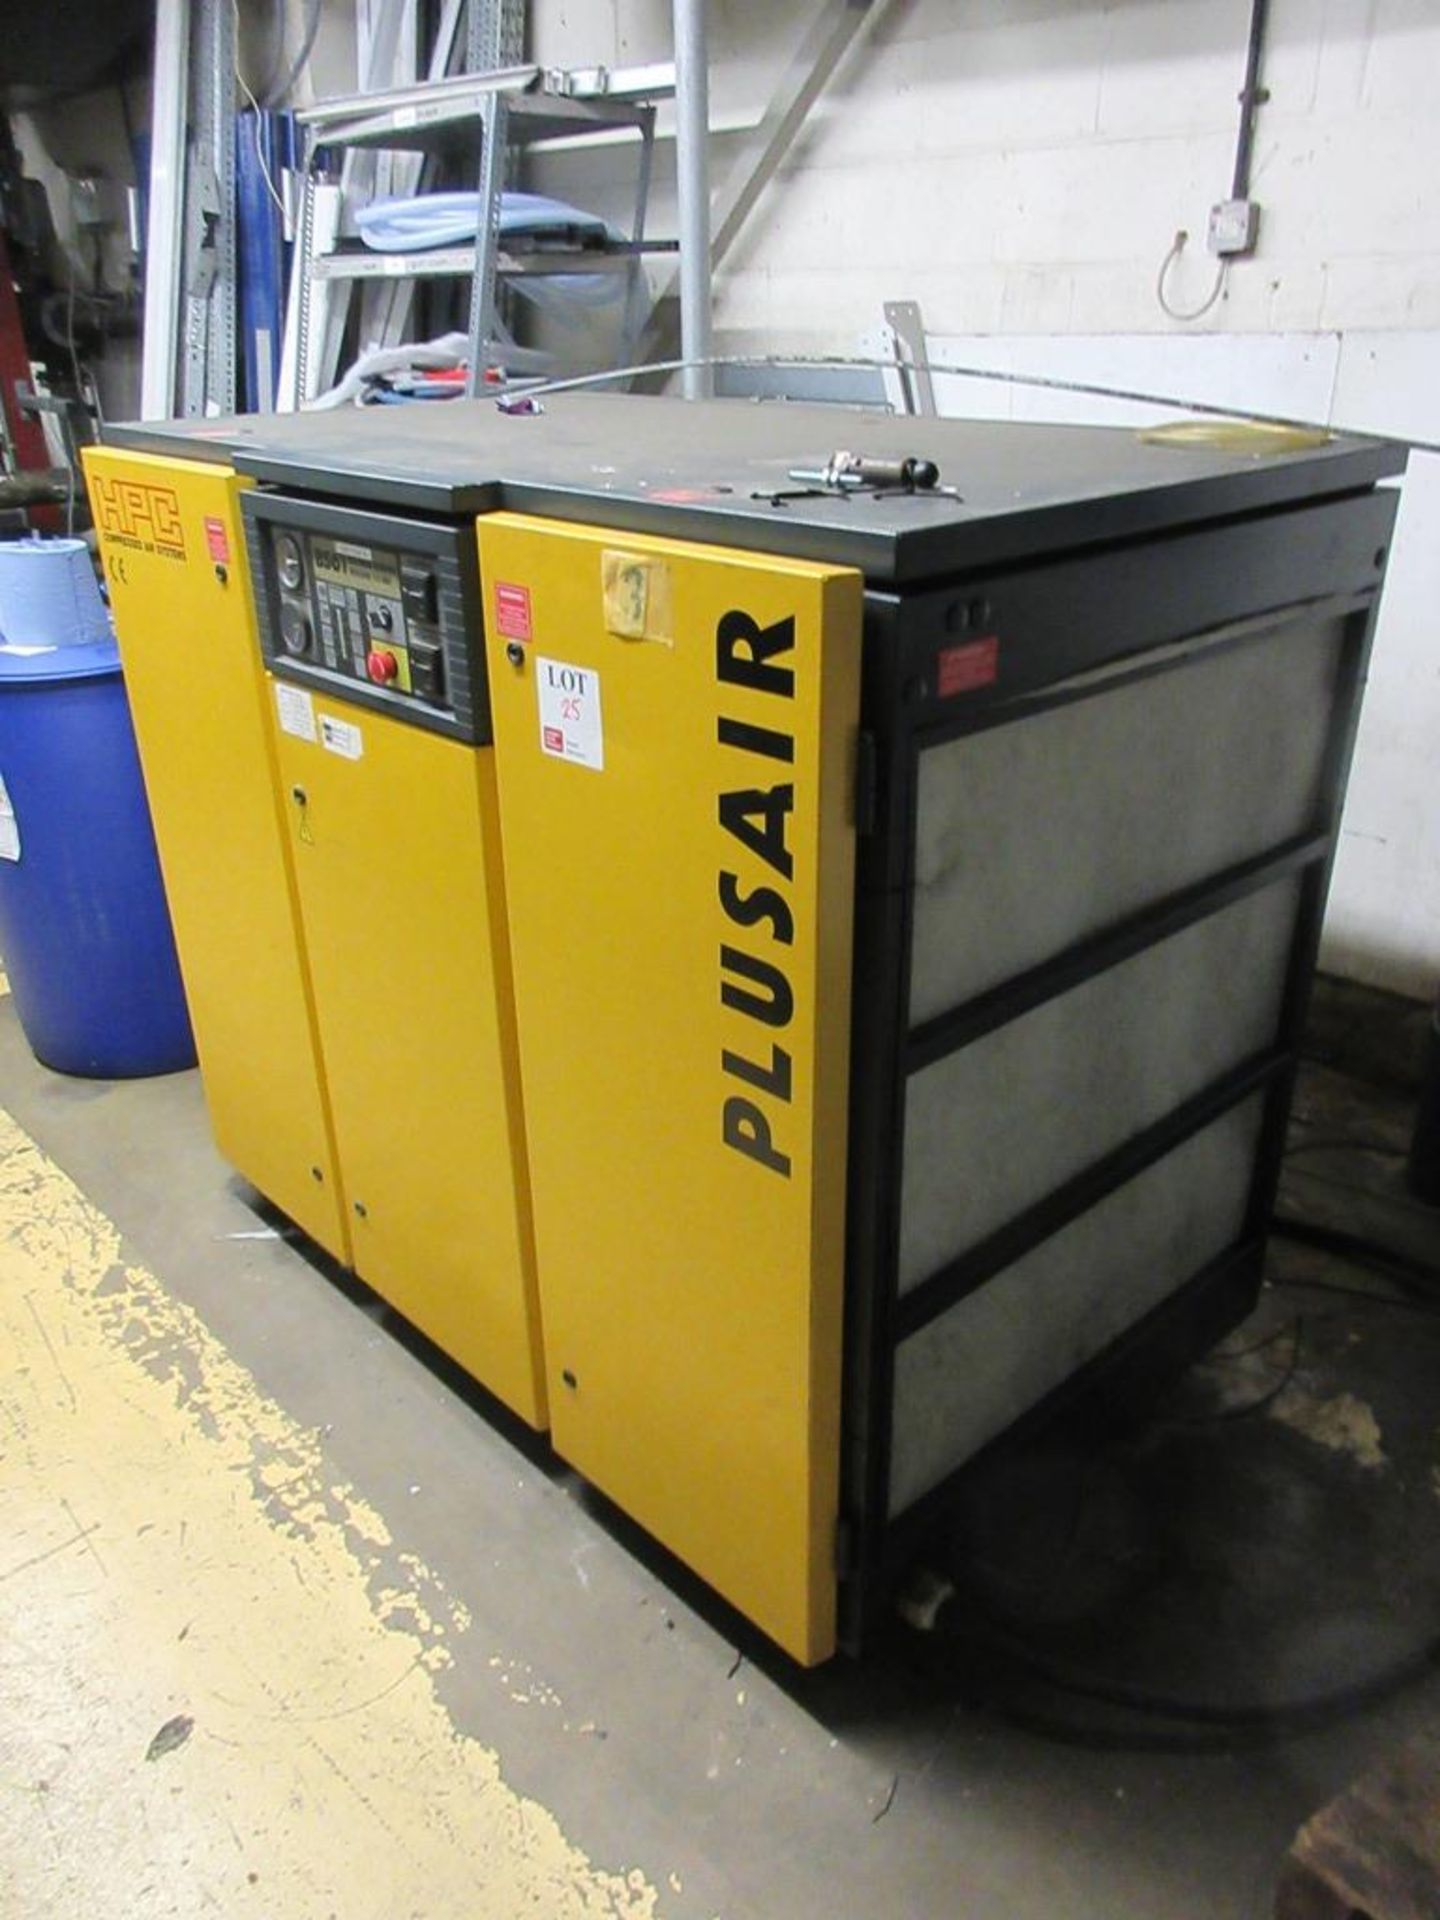 HPC Plusair BS61 packaged rotary screw air compressor set, s/n: 5102326 (19996) NB: This item has no - Image 7 of 8